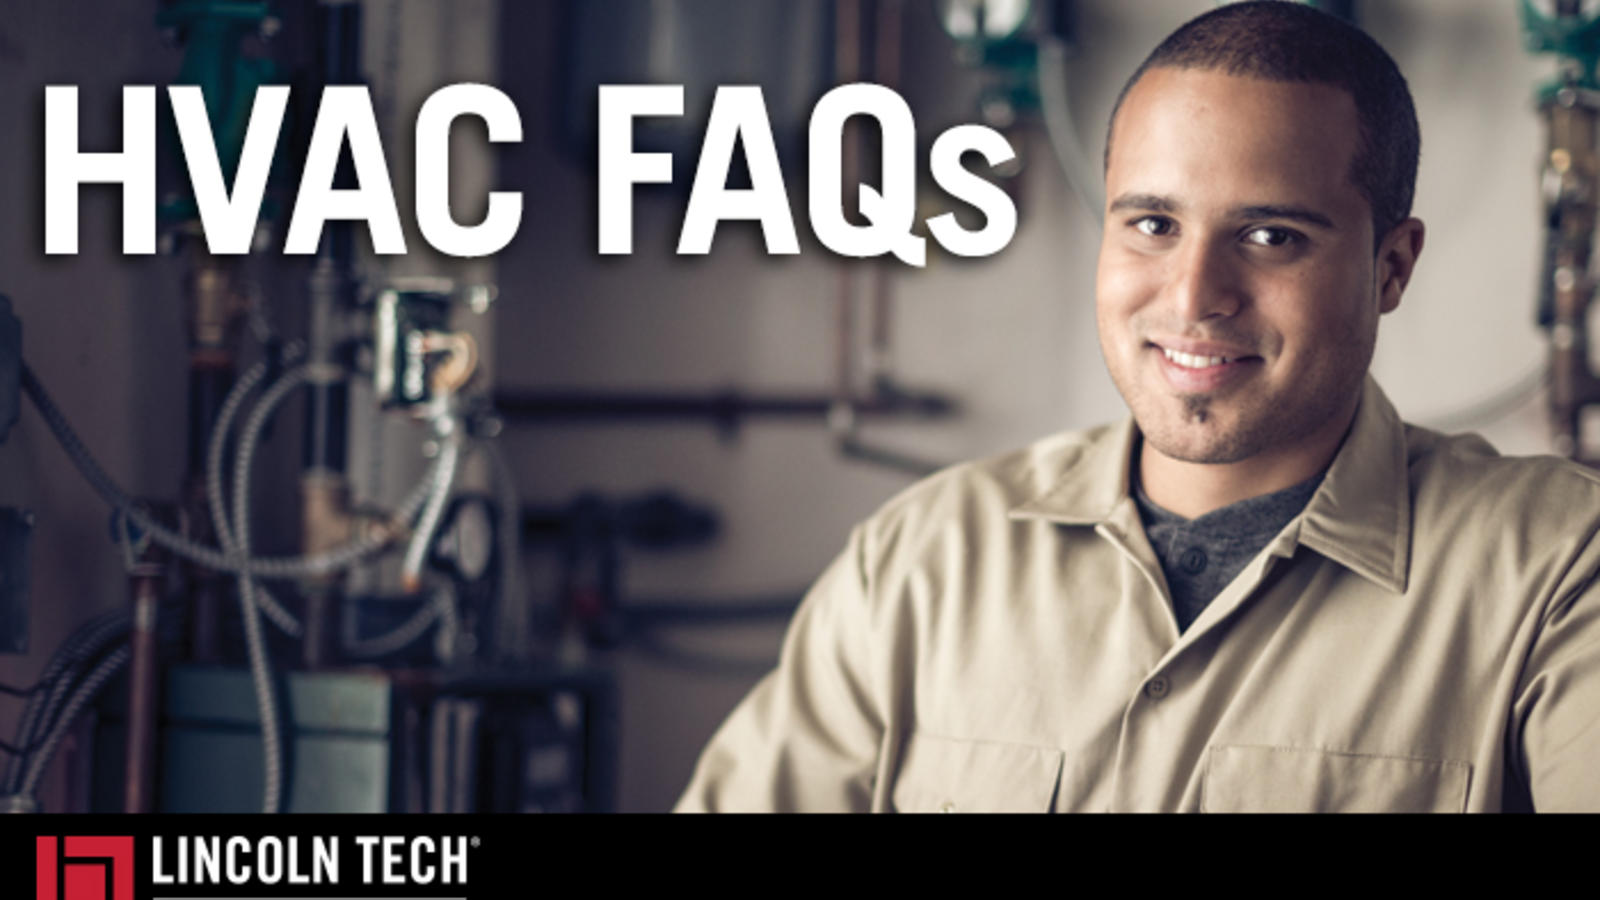 Hvac Programs - Take Your First Step At Lincoln Tech